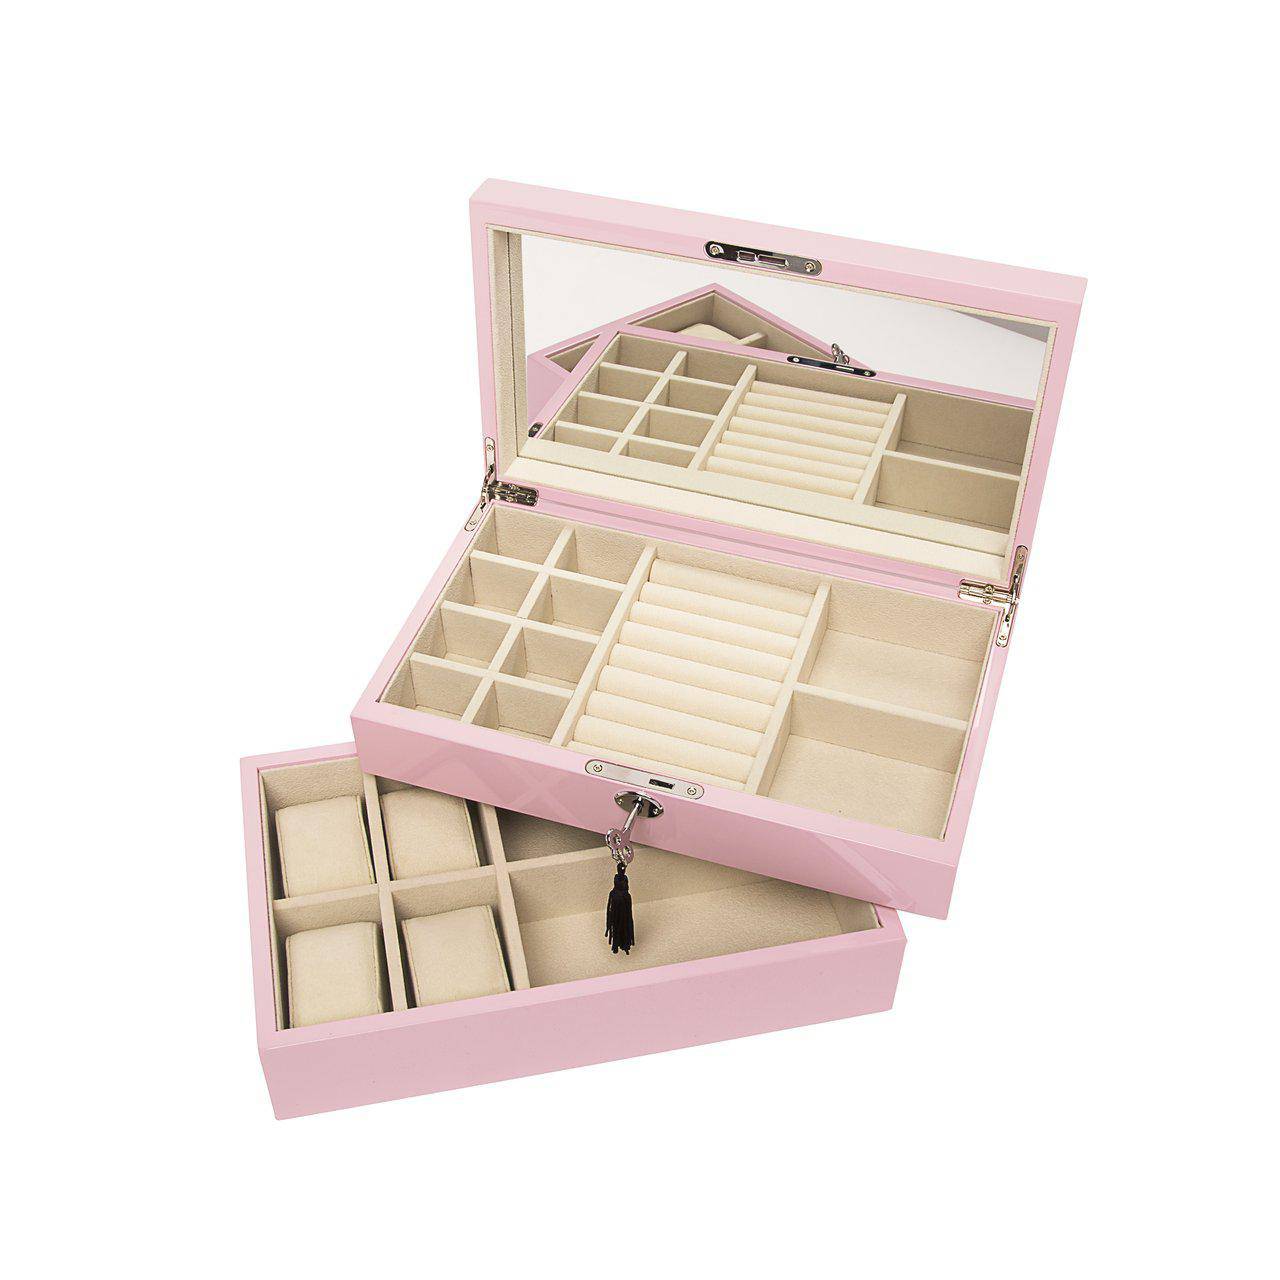 Rose Quartz Stackable High-Gloss Jewelry Box - Twinkle Twinkle Little One